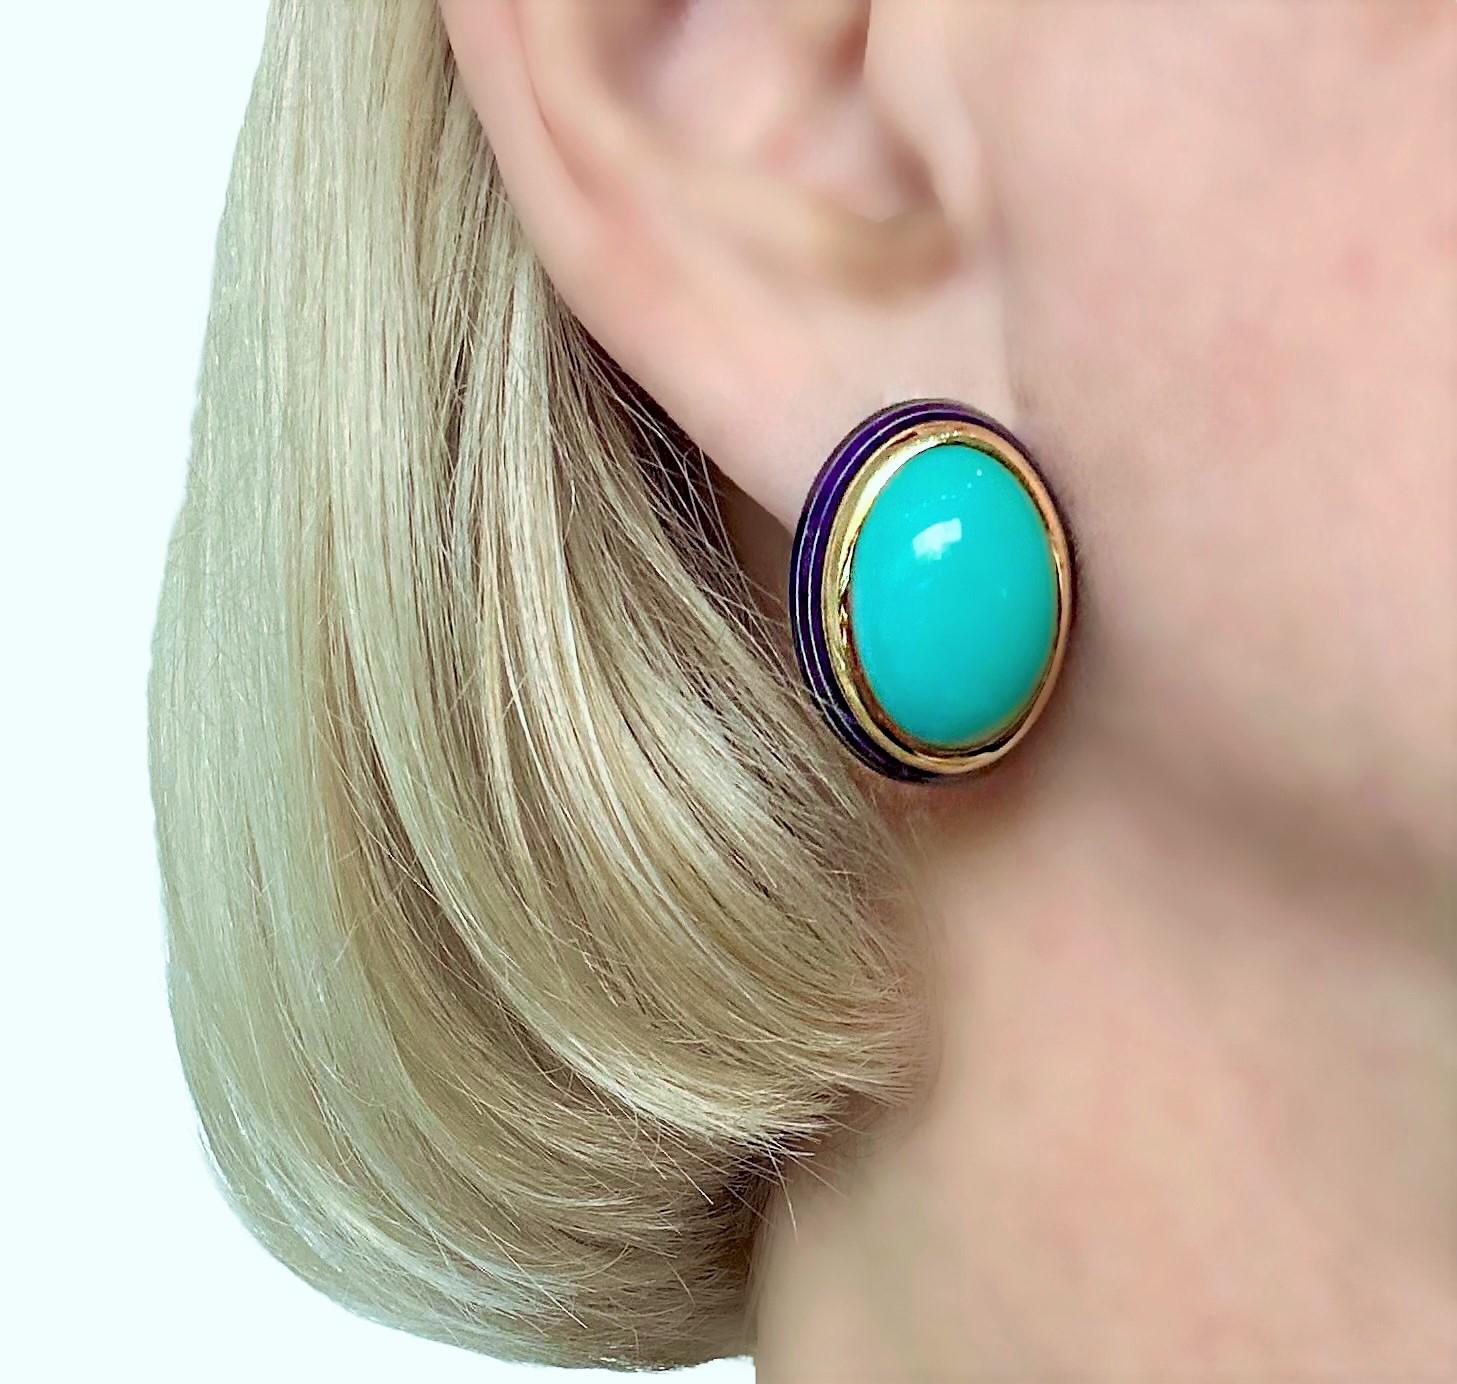 Women's Tailored, Mid-20th Century 18K Yellow Gold, Turquoise and Blue Enamel Earrings For Sale